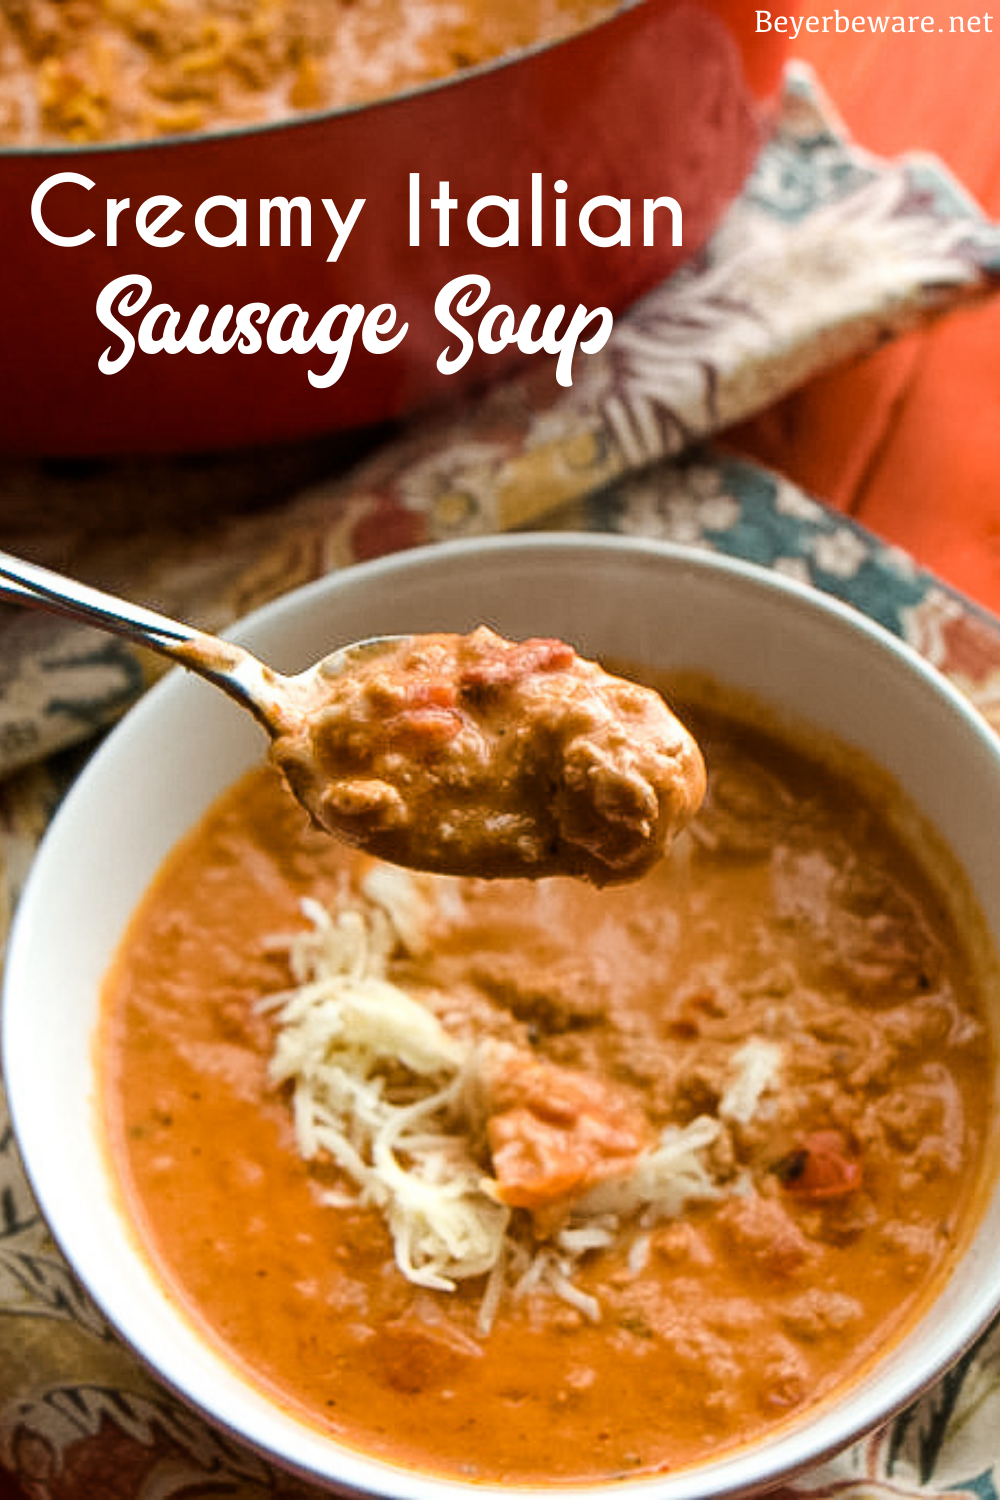 Creamy Italian Sausage Soup recipe is my new go-to tomato and sausage soup recipe that is rich and hearty, perfect for an easy dinner.